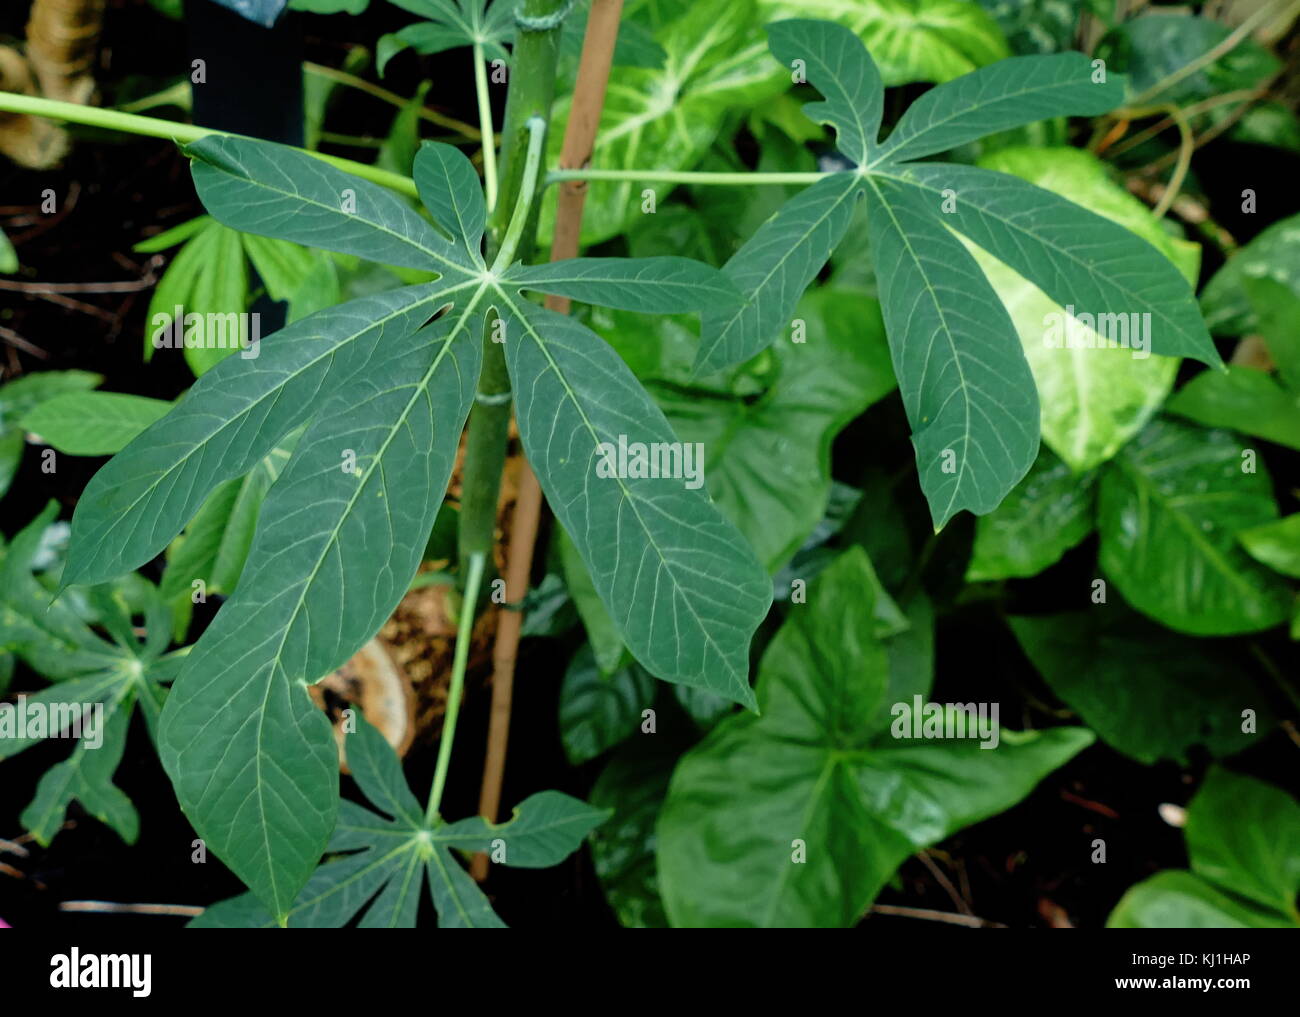 Manihot esculenta (commonly called cassava, is a woody shrub native to South America of the spurge family Stock Photo